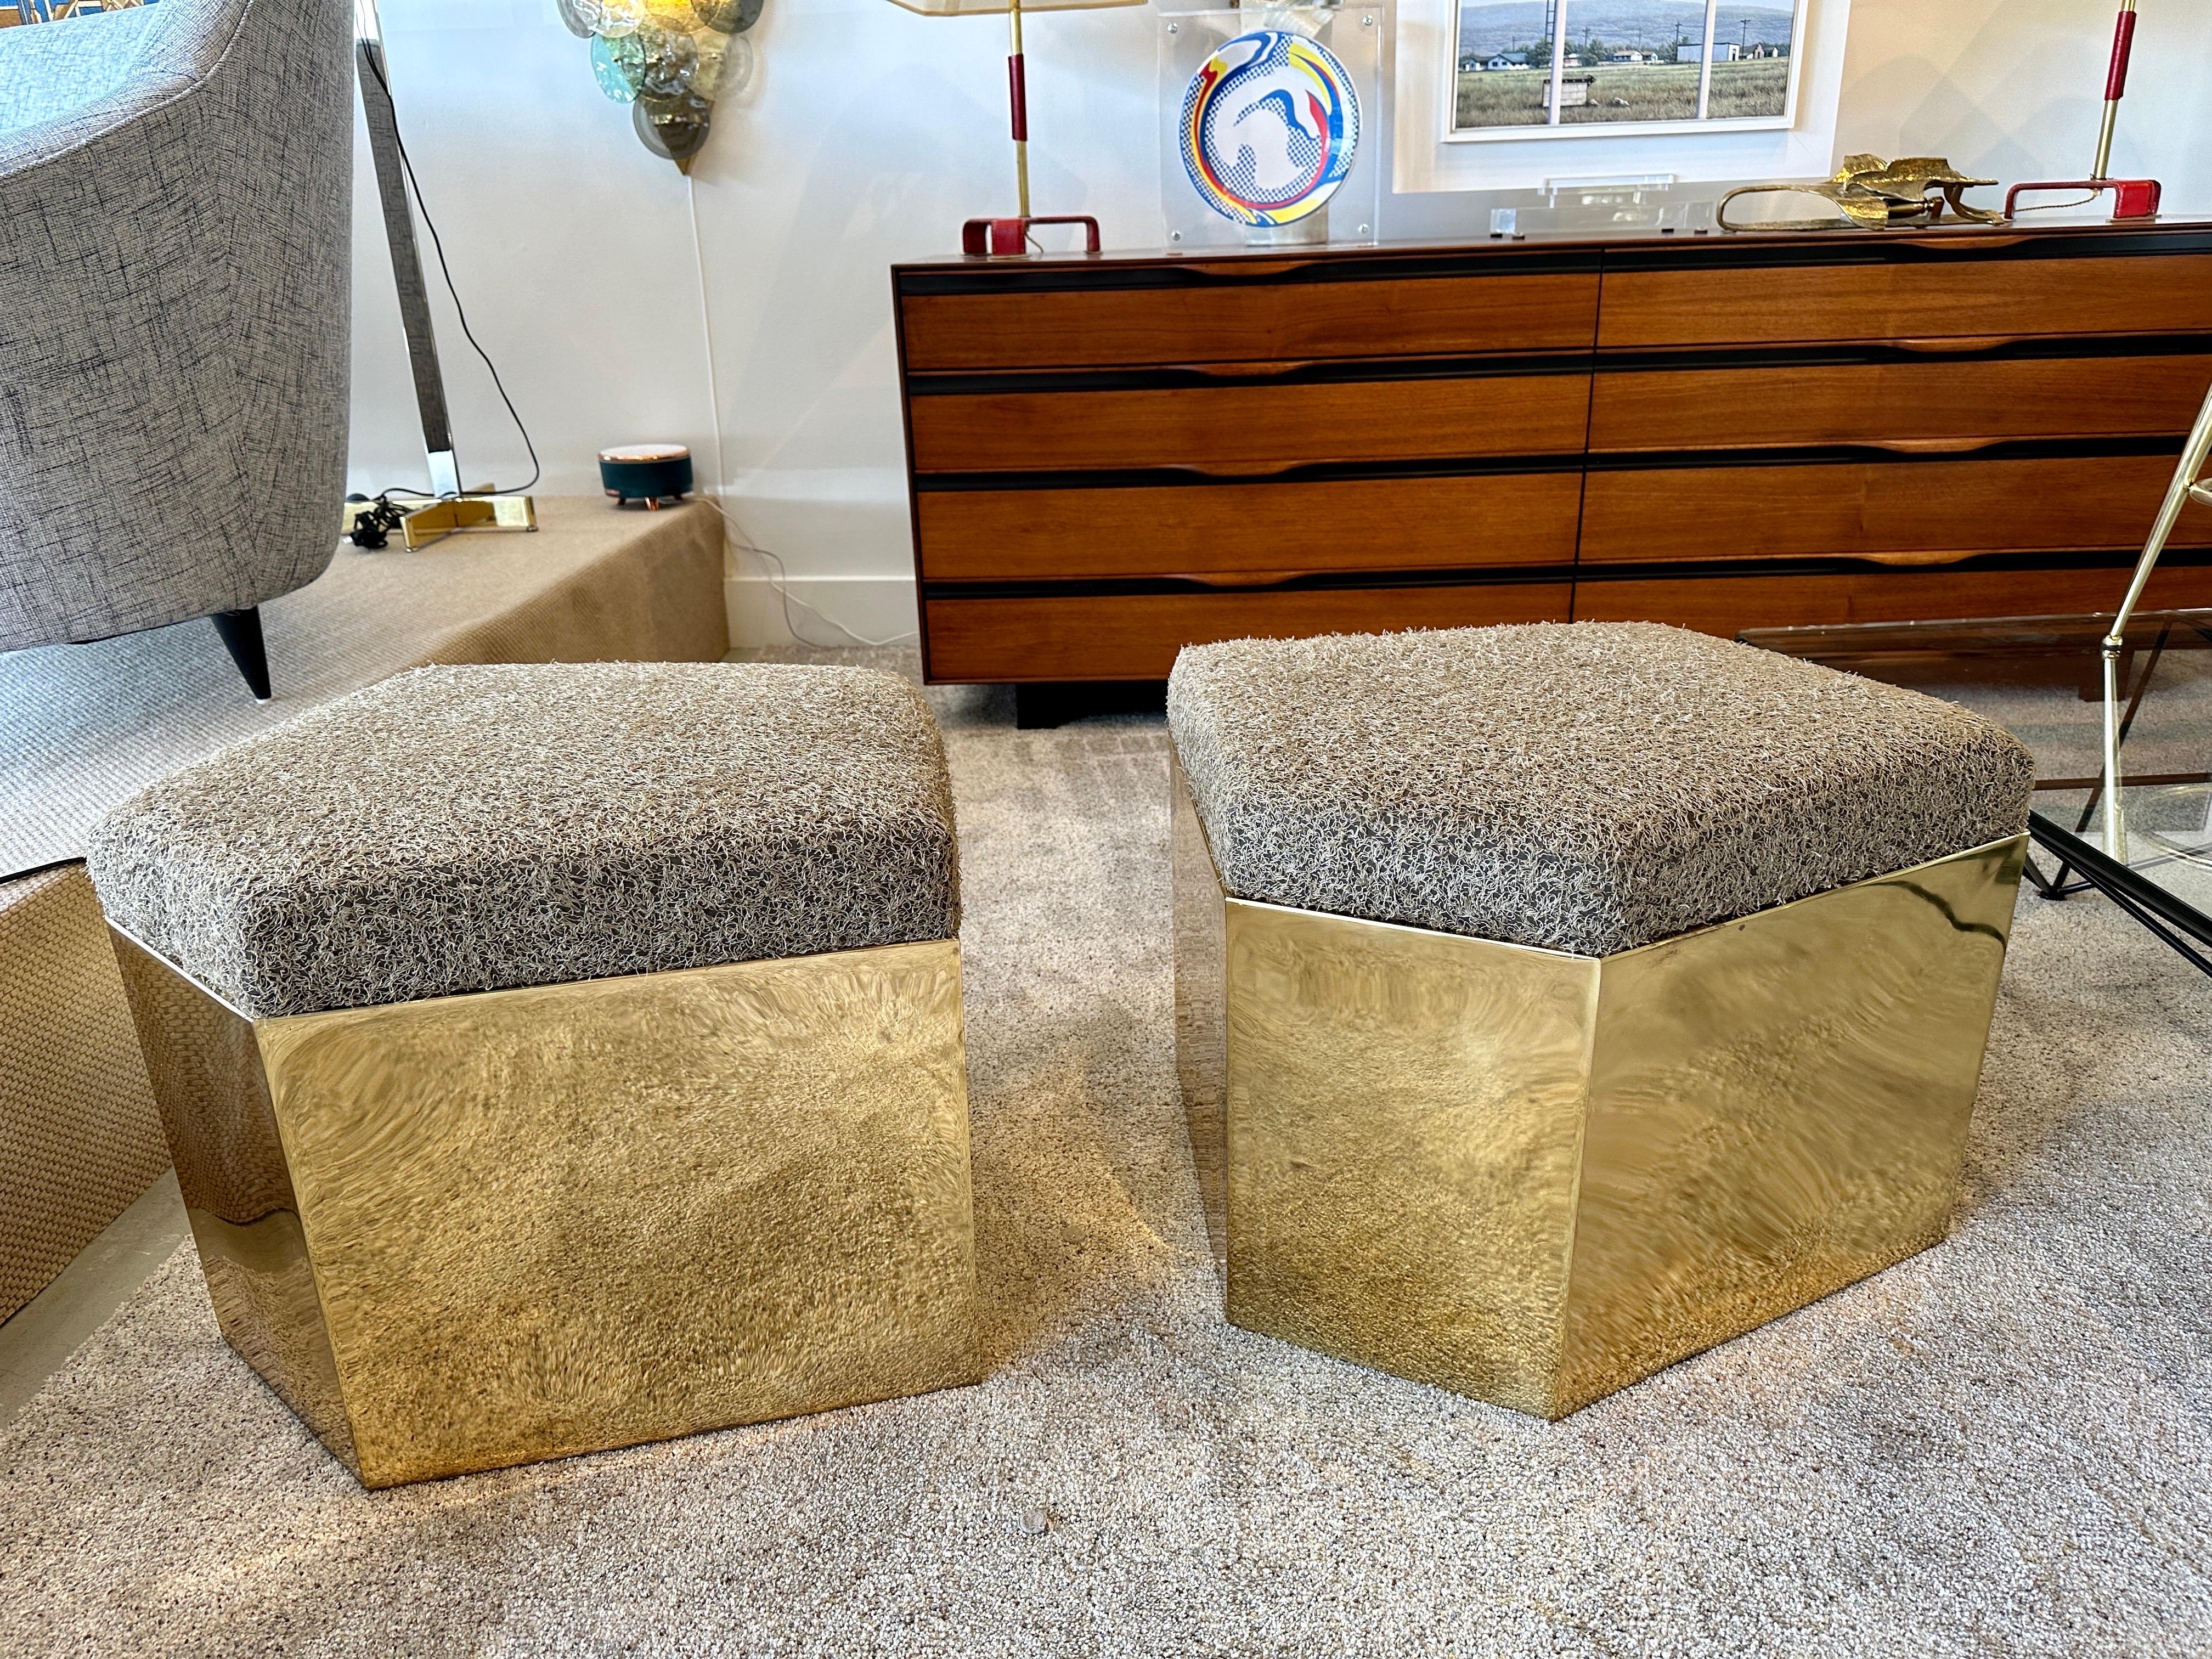 This wonderful pair of trapezoid shaped brass stools/ benches/ ottomans - with a whimsical new furry upholstery in a neutral tone are VERY comfortable and easy to move around for additional seating anywhere!